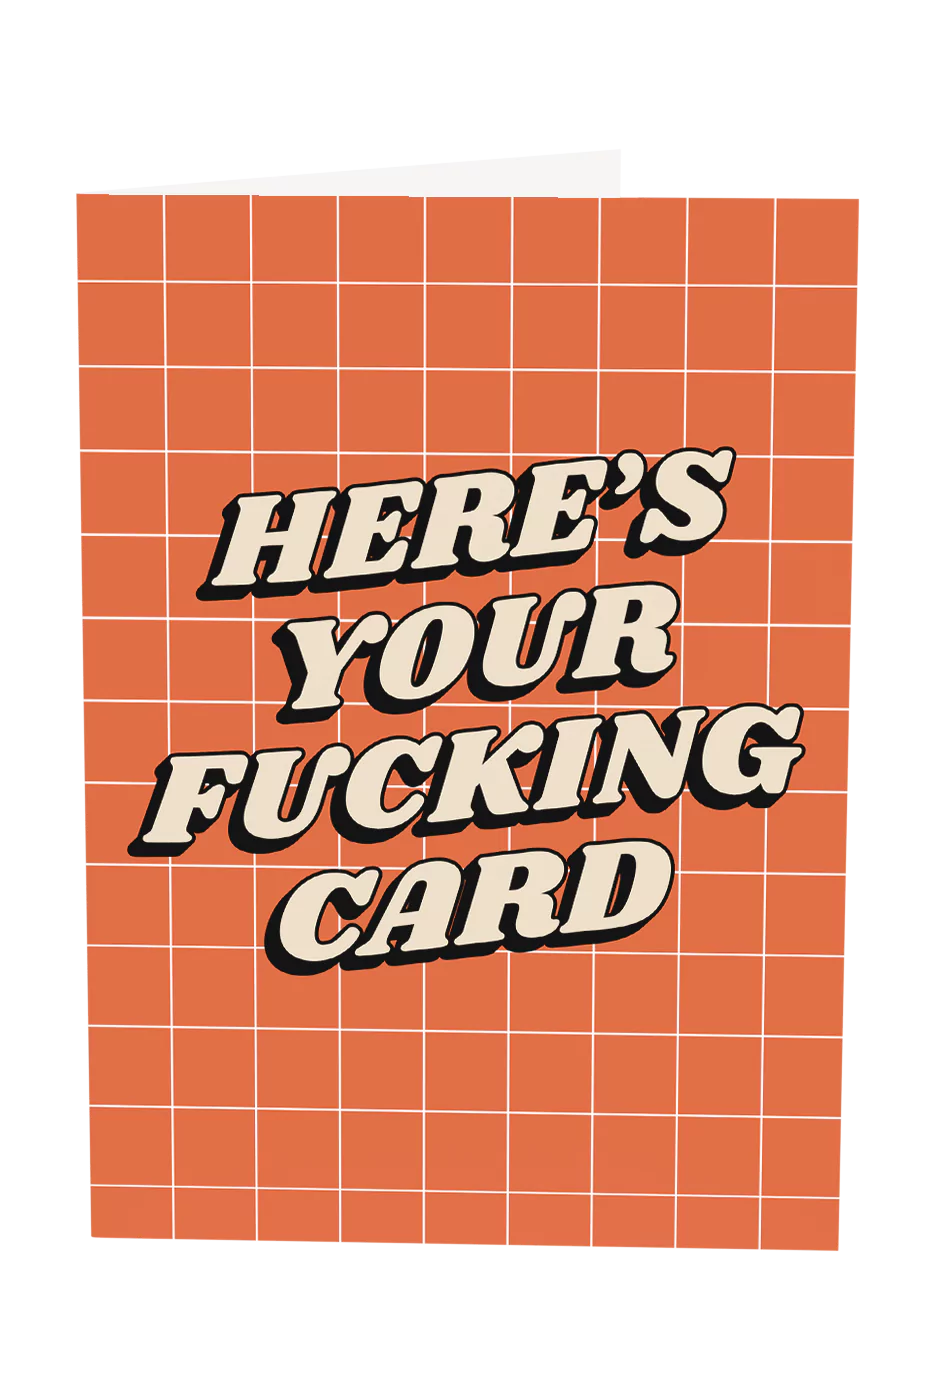 Here's Your Card